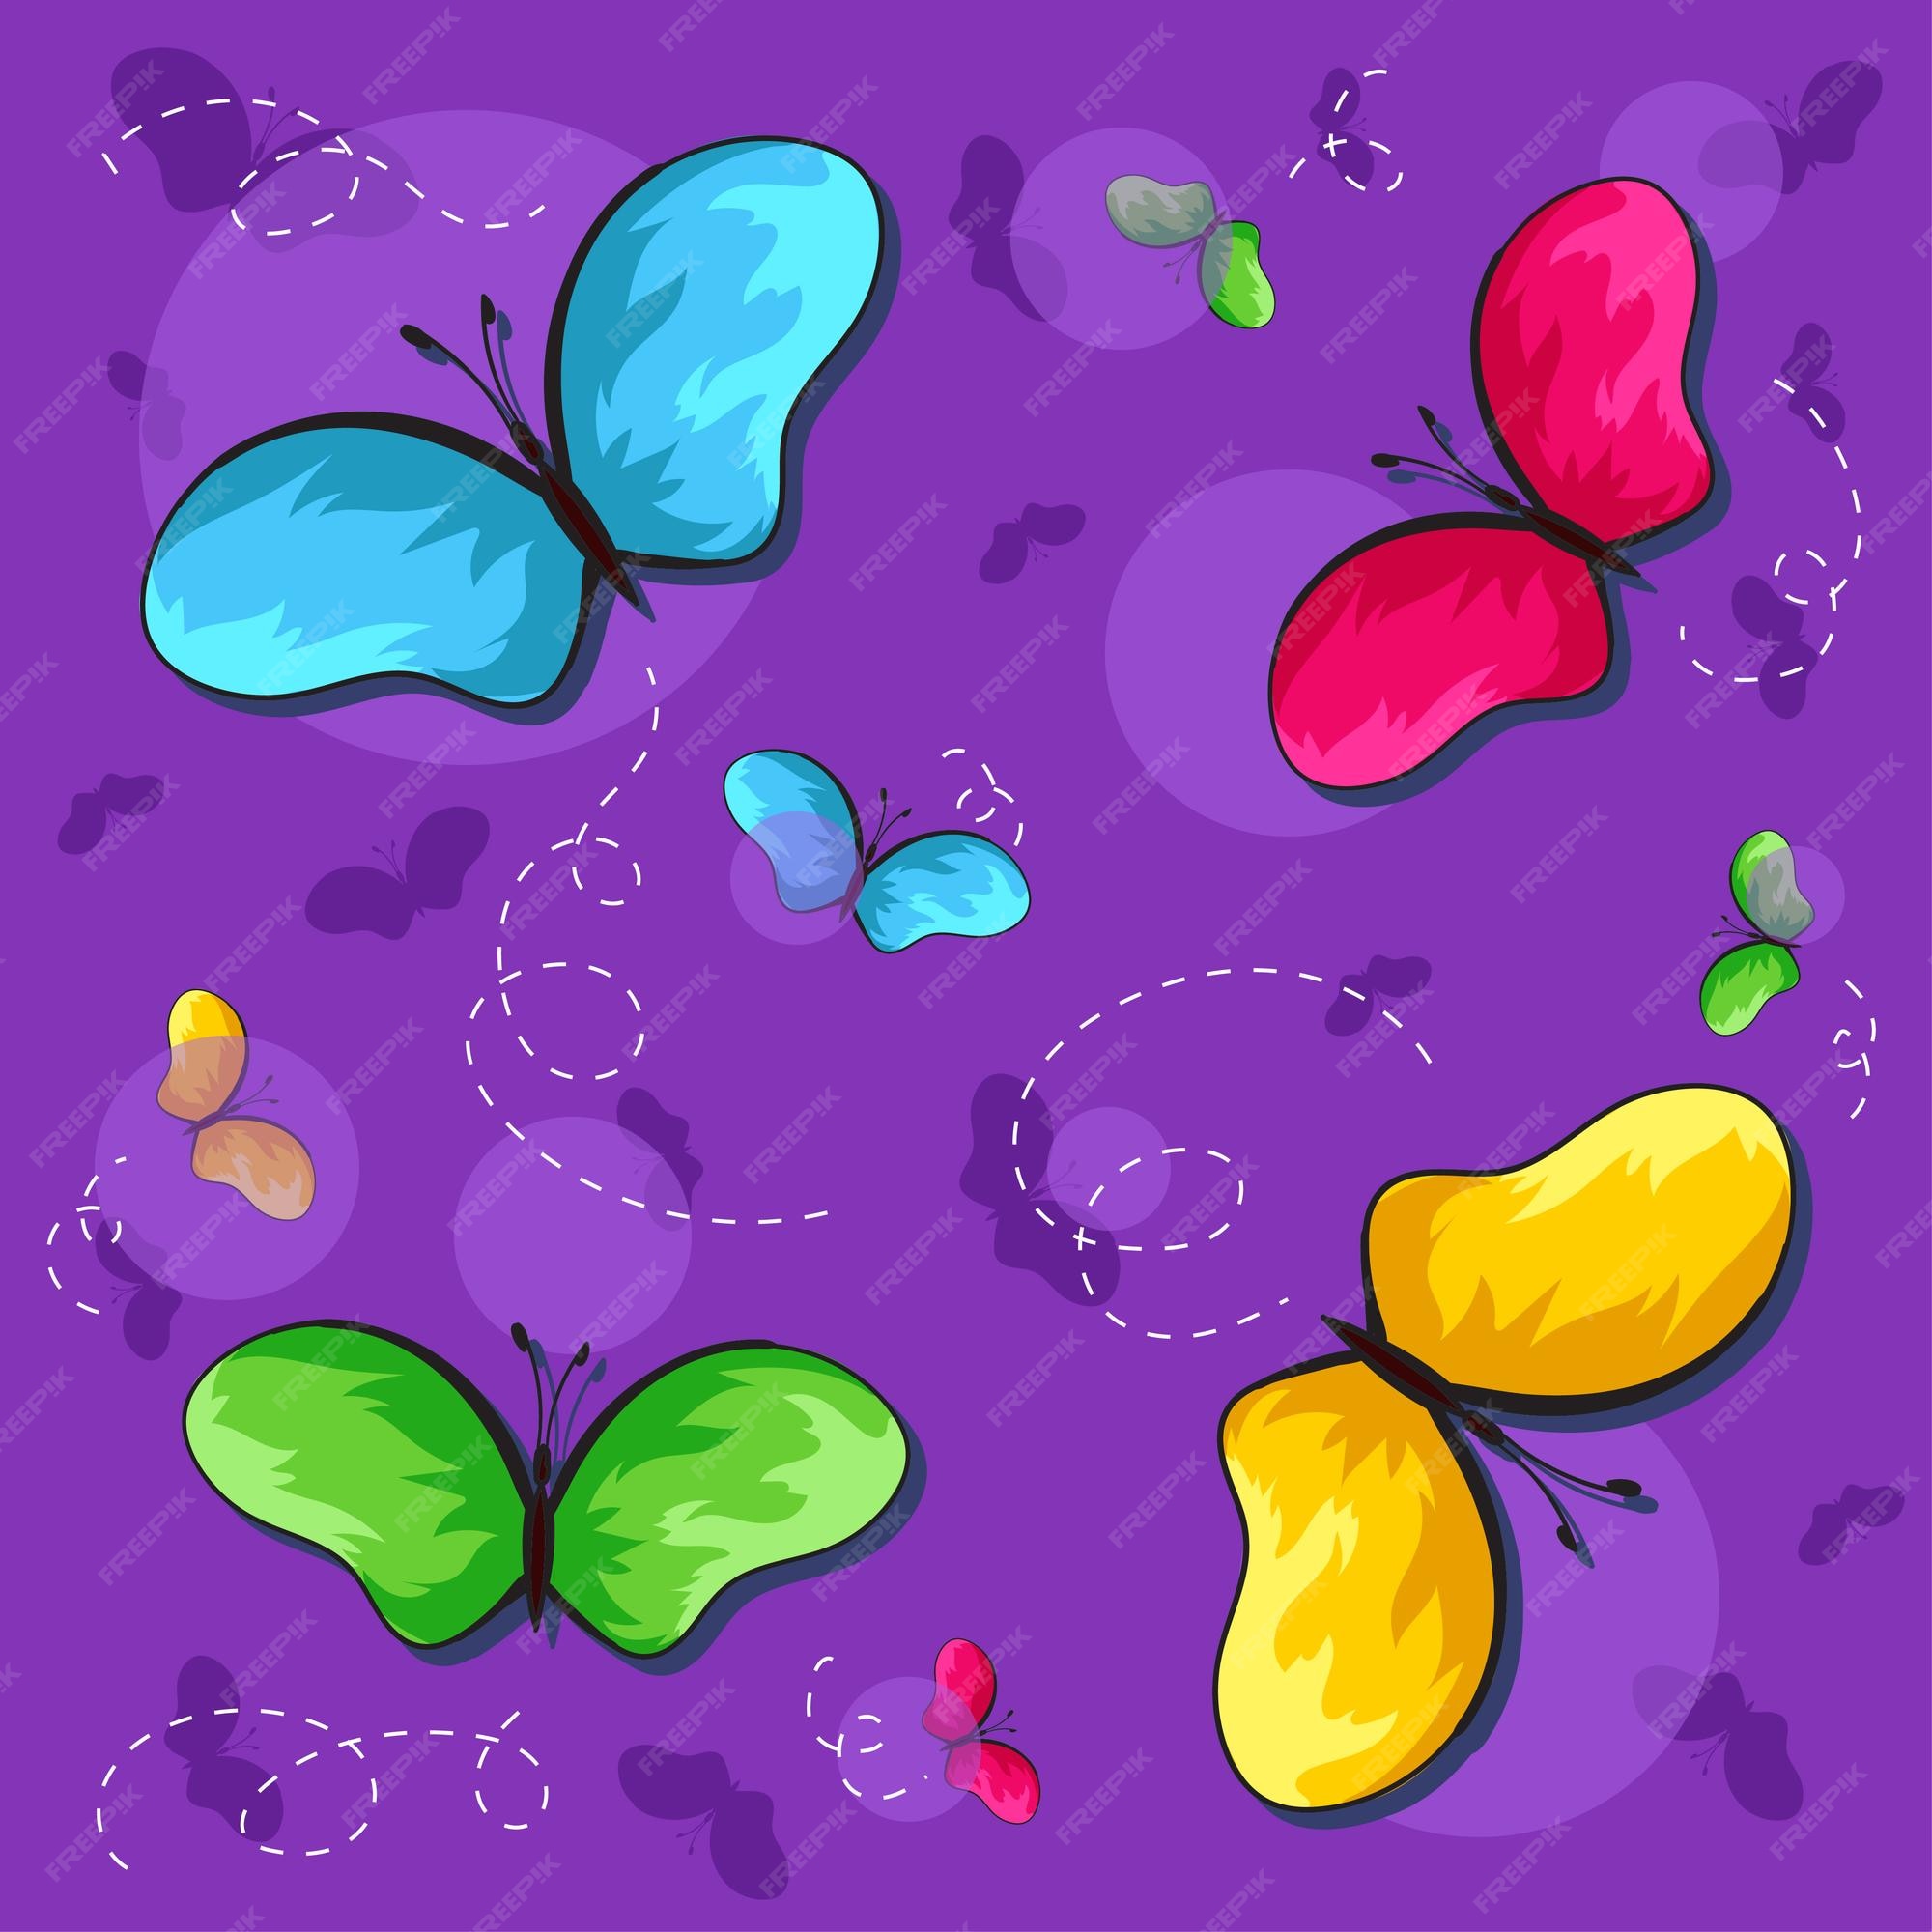 Page 10 | Butterfly Top View Images - Free Download on Freepik